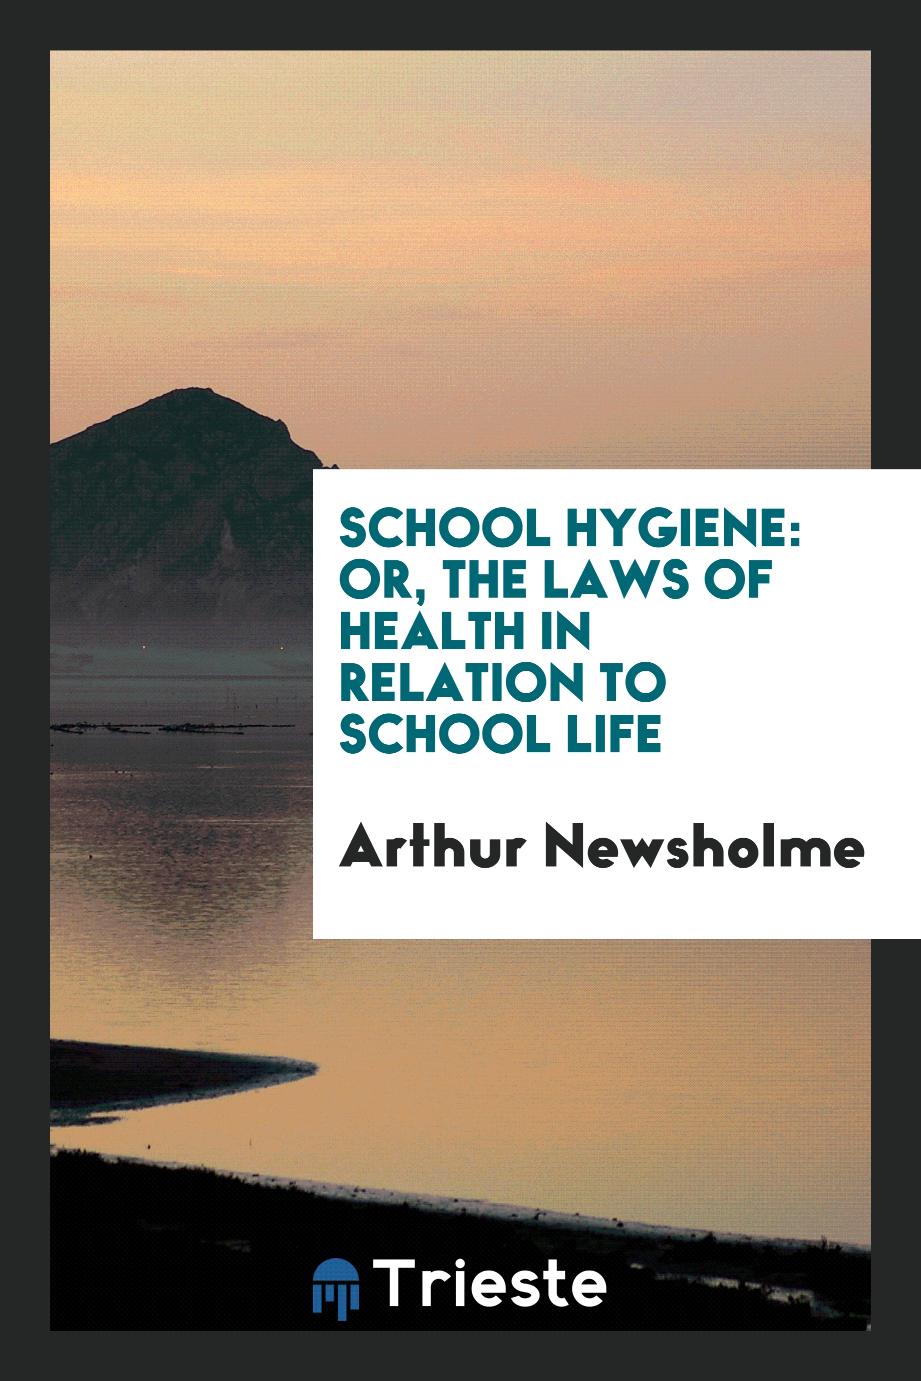 School Hygiene: Or, The Laws of Health in Relation to School Life